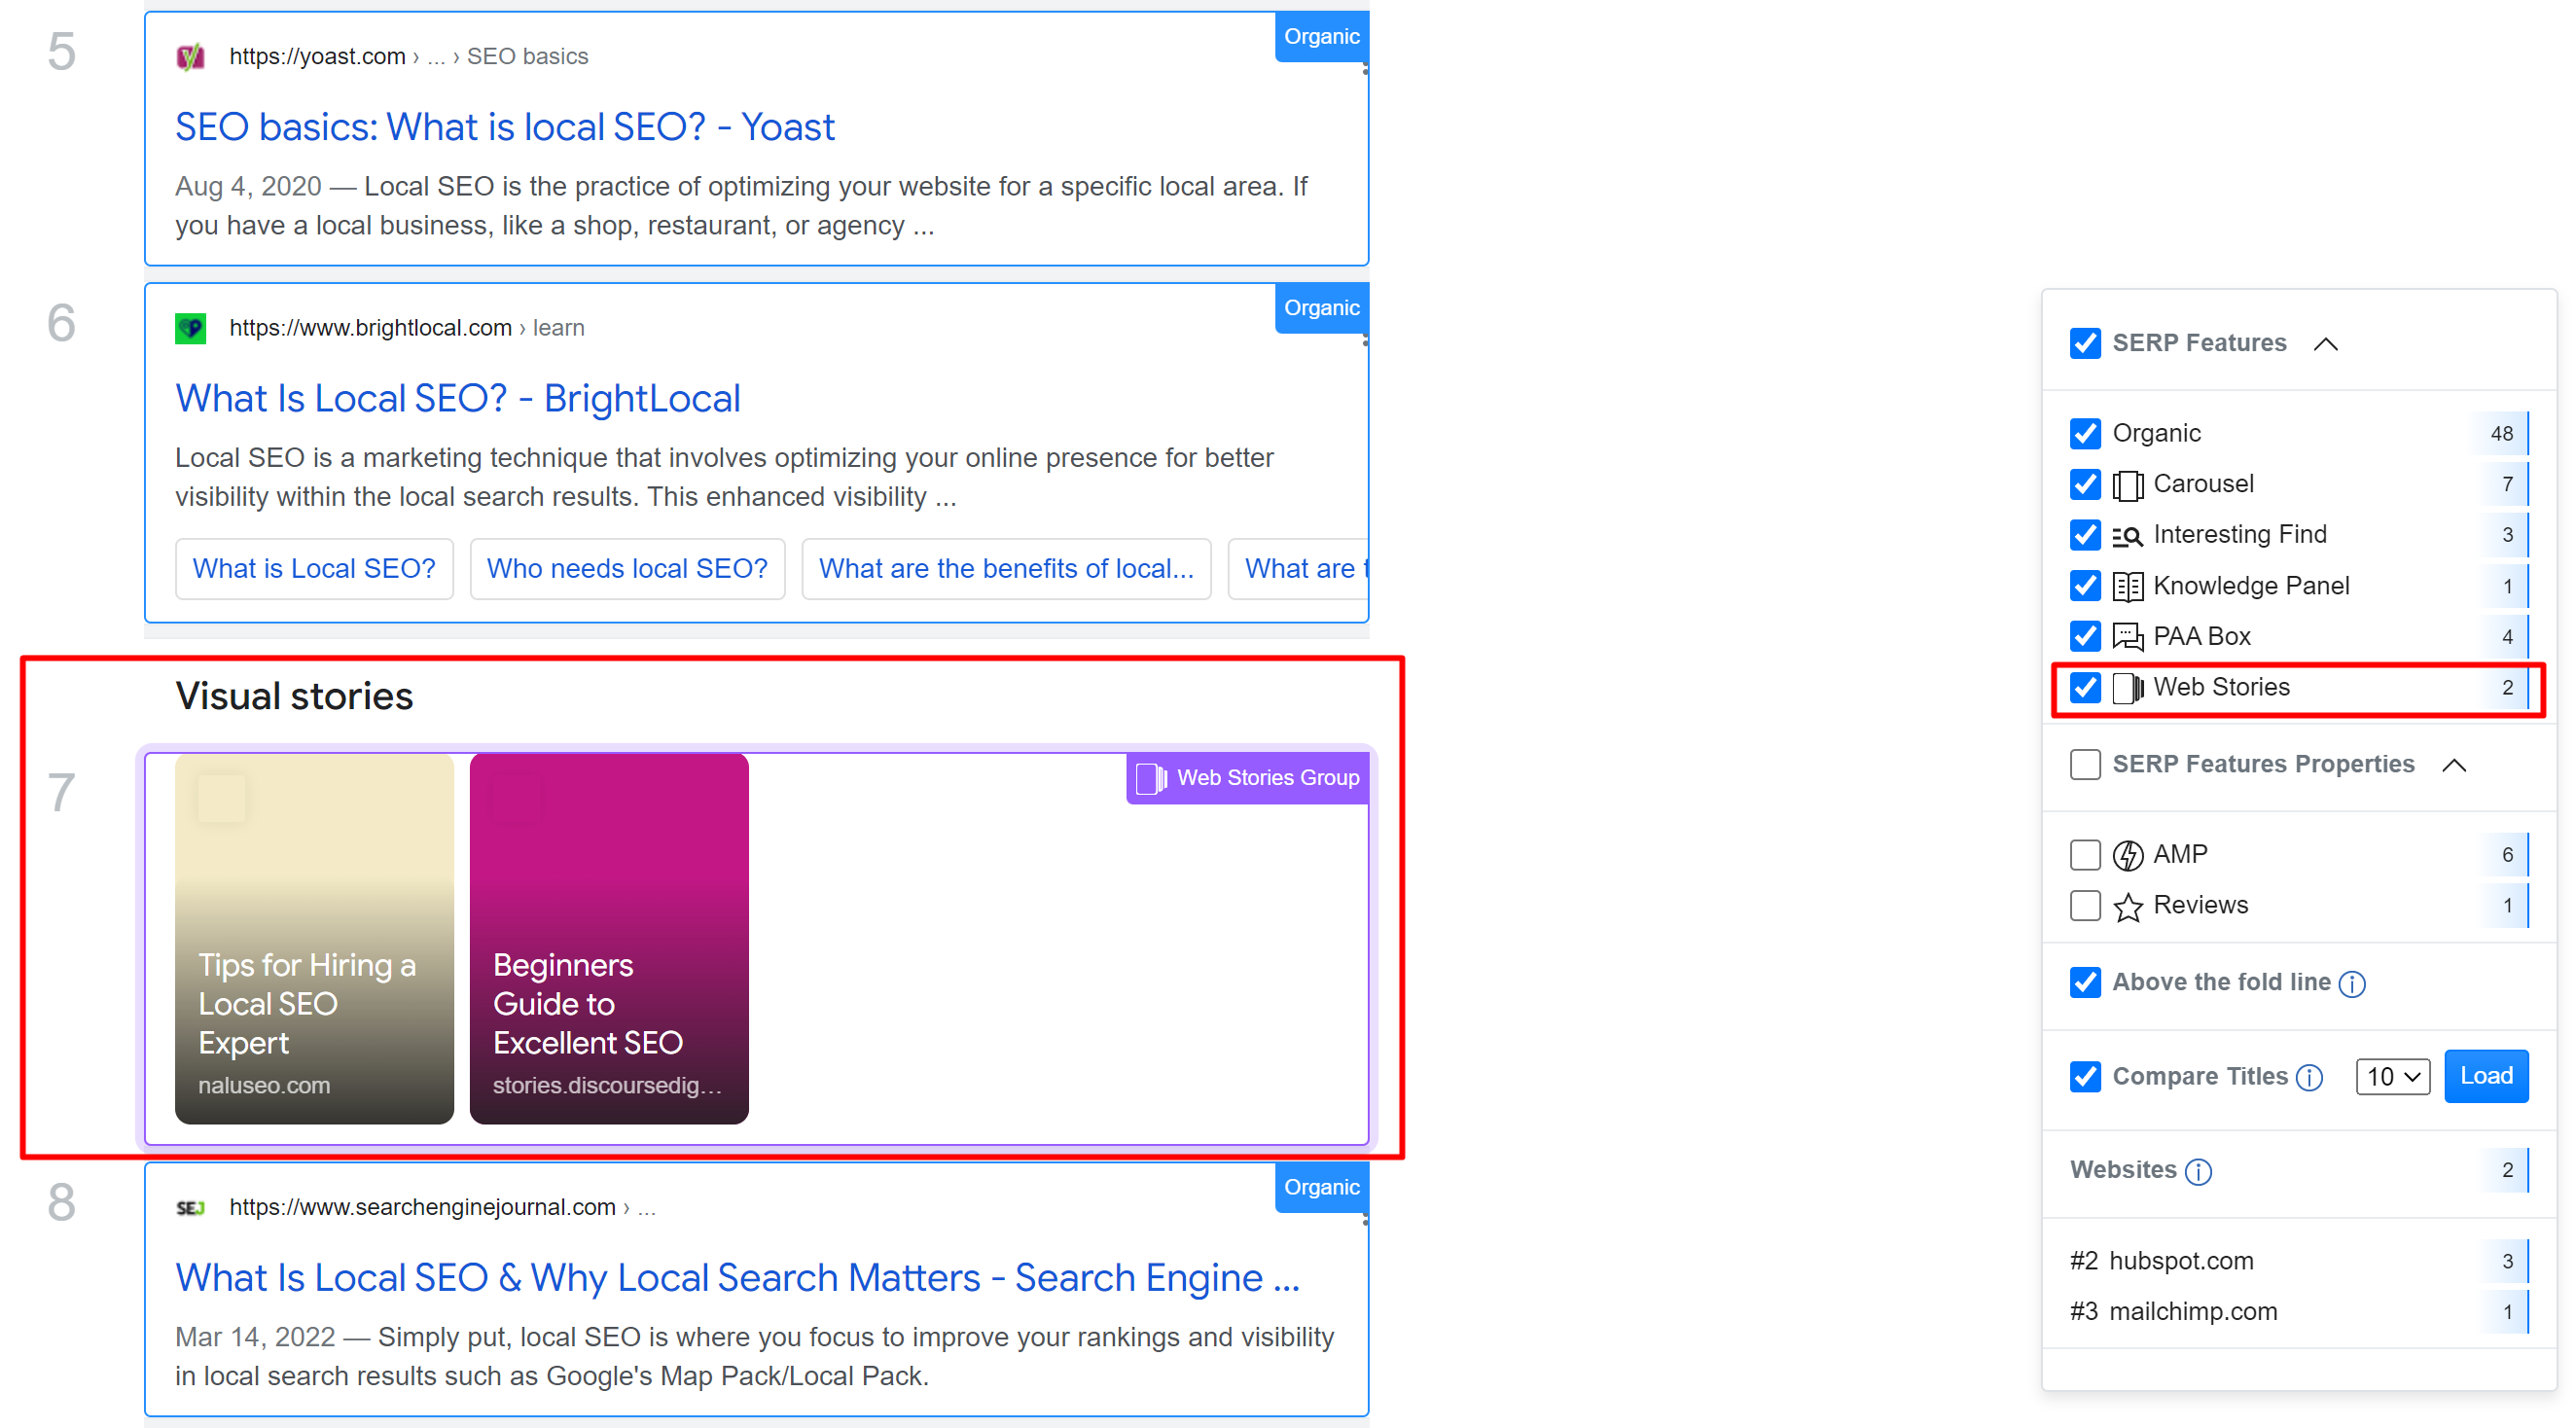 Advanced Web Ranking, visual stories in serp view